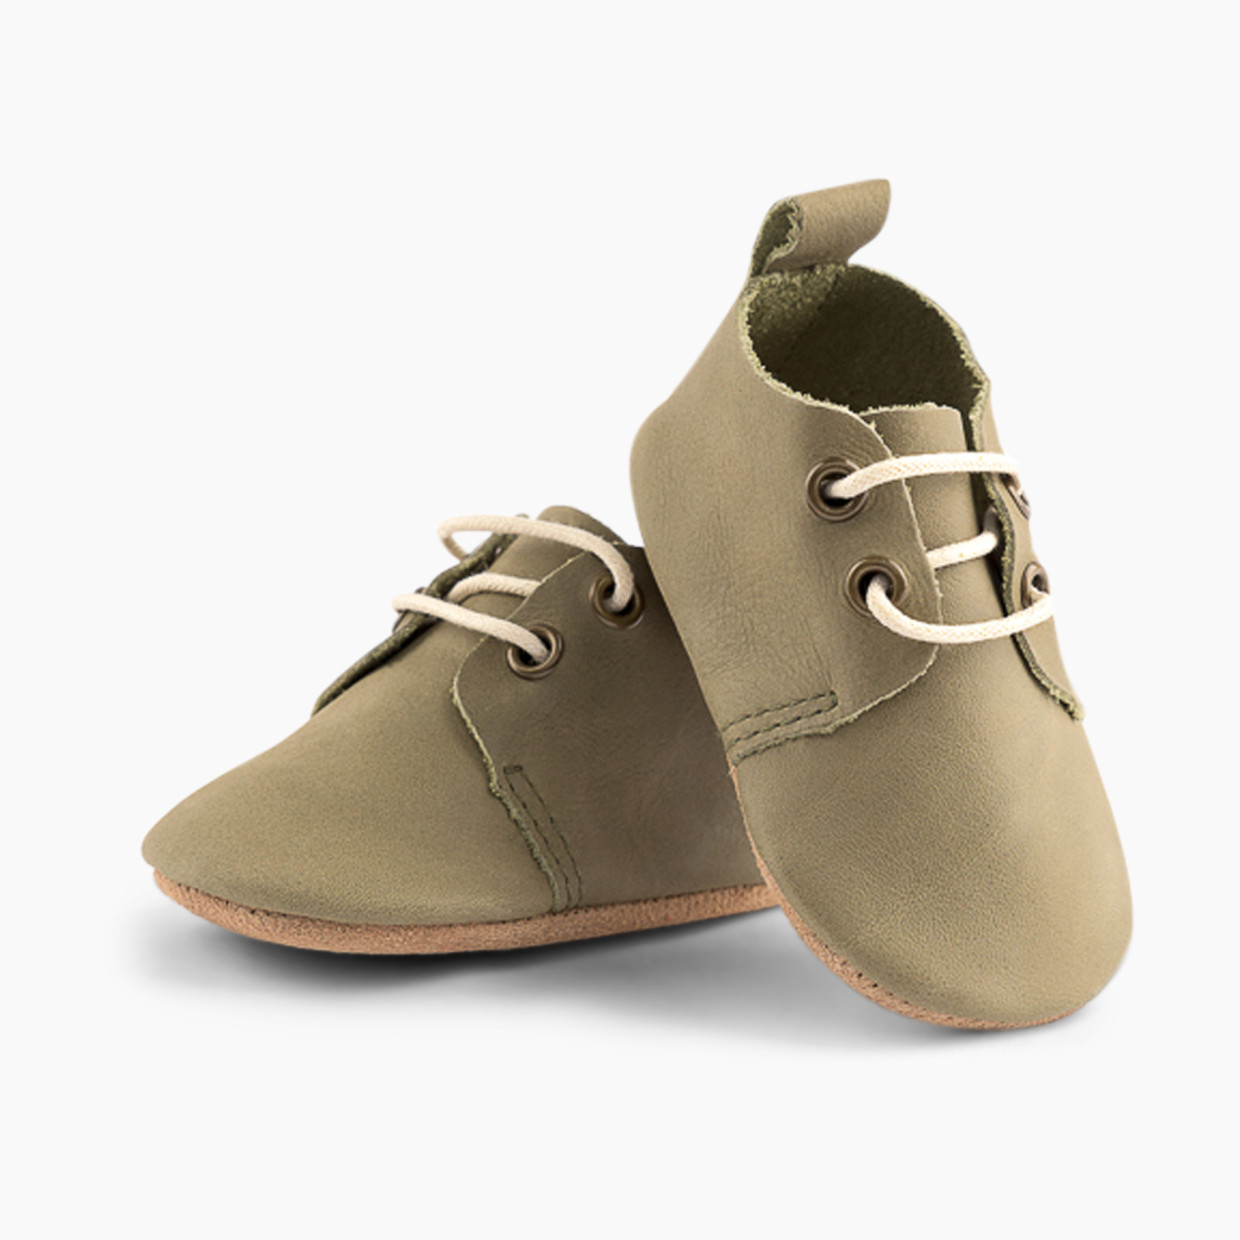 Piper Finn Soft Sole Oxford - Olive, 2 (3-6 Months).